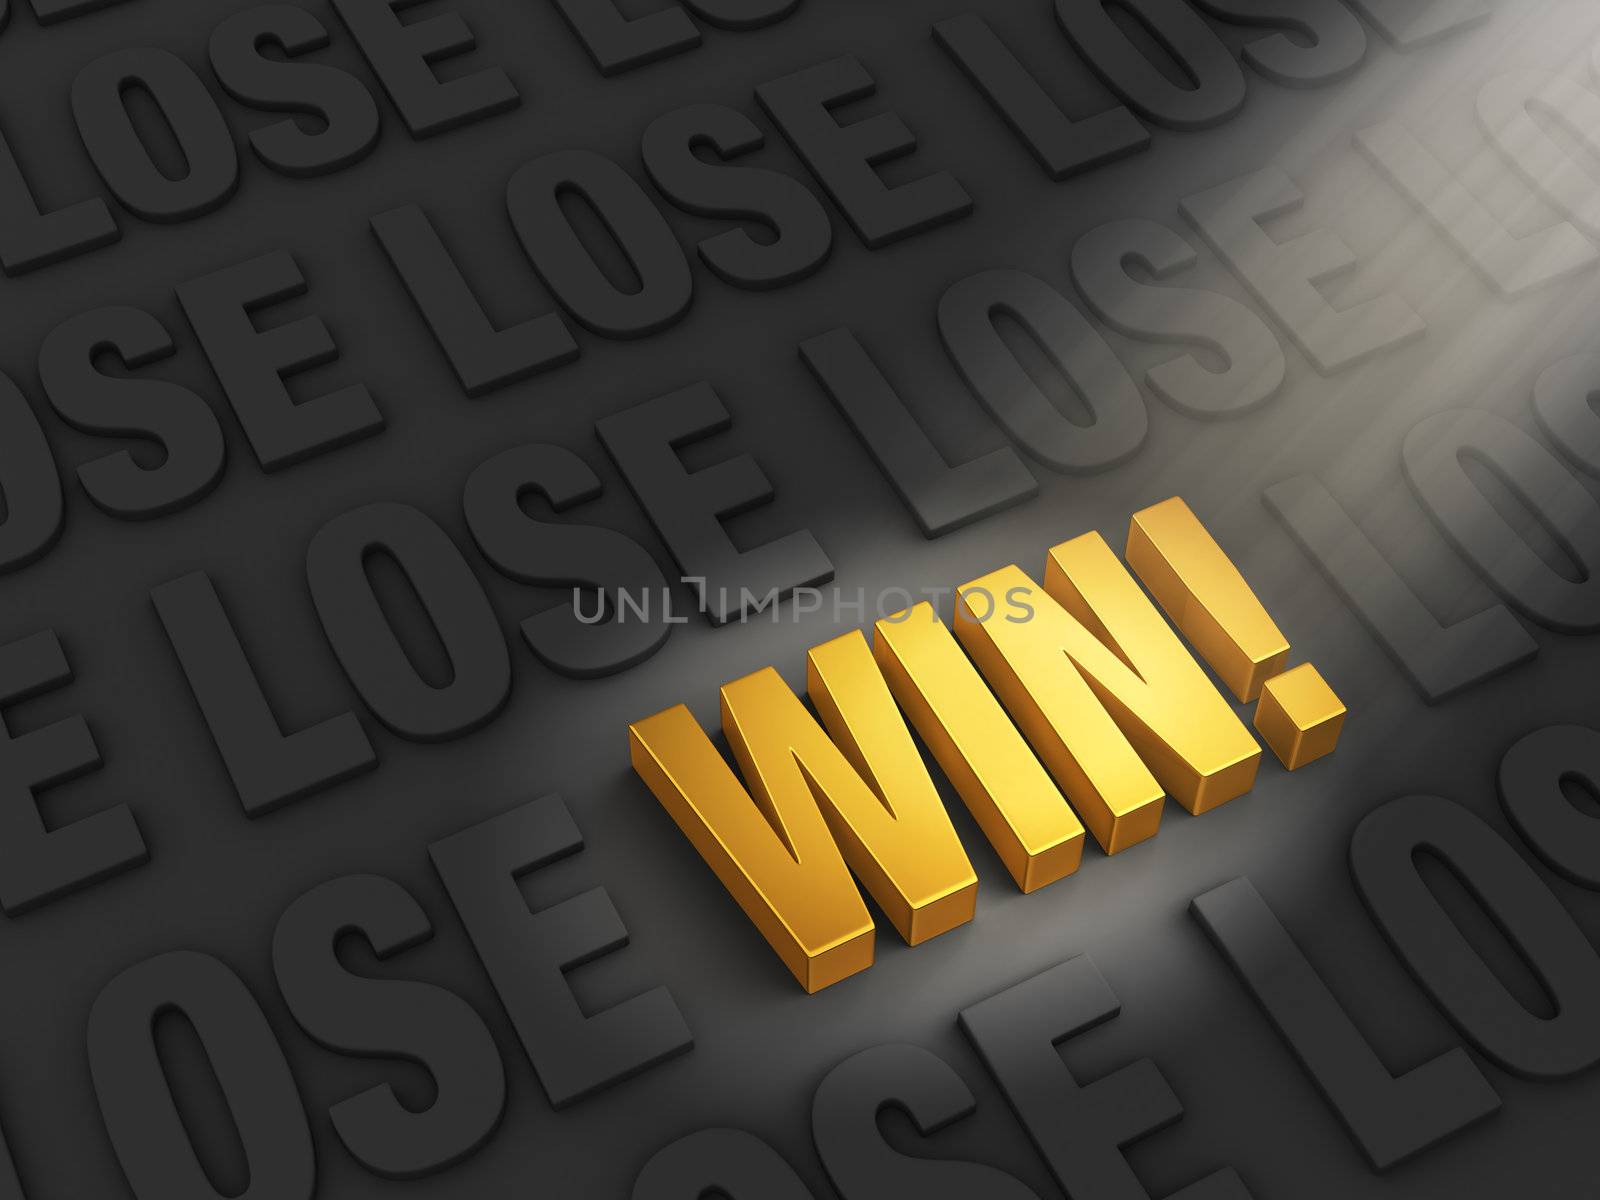 A spotlight illuminates a bright, gold "WIN" on a dark background with rows of word "LOSE"